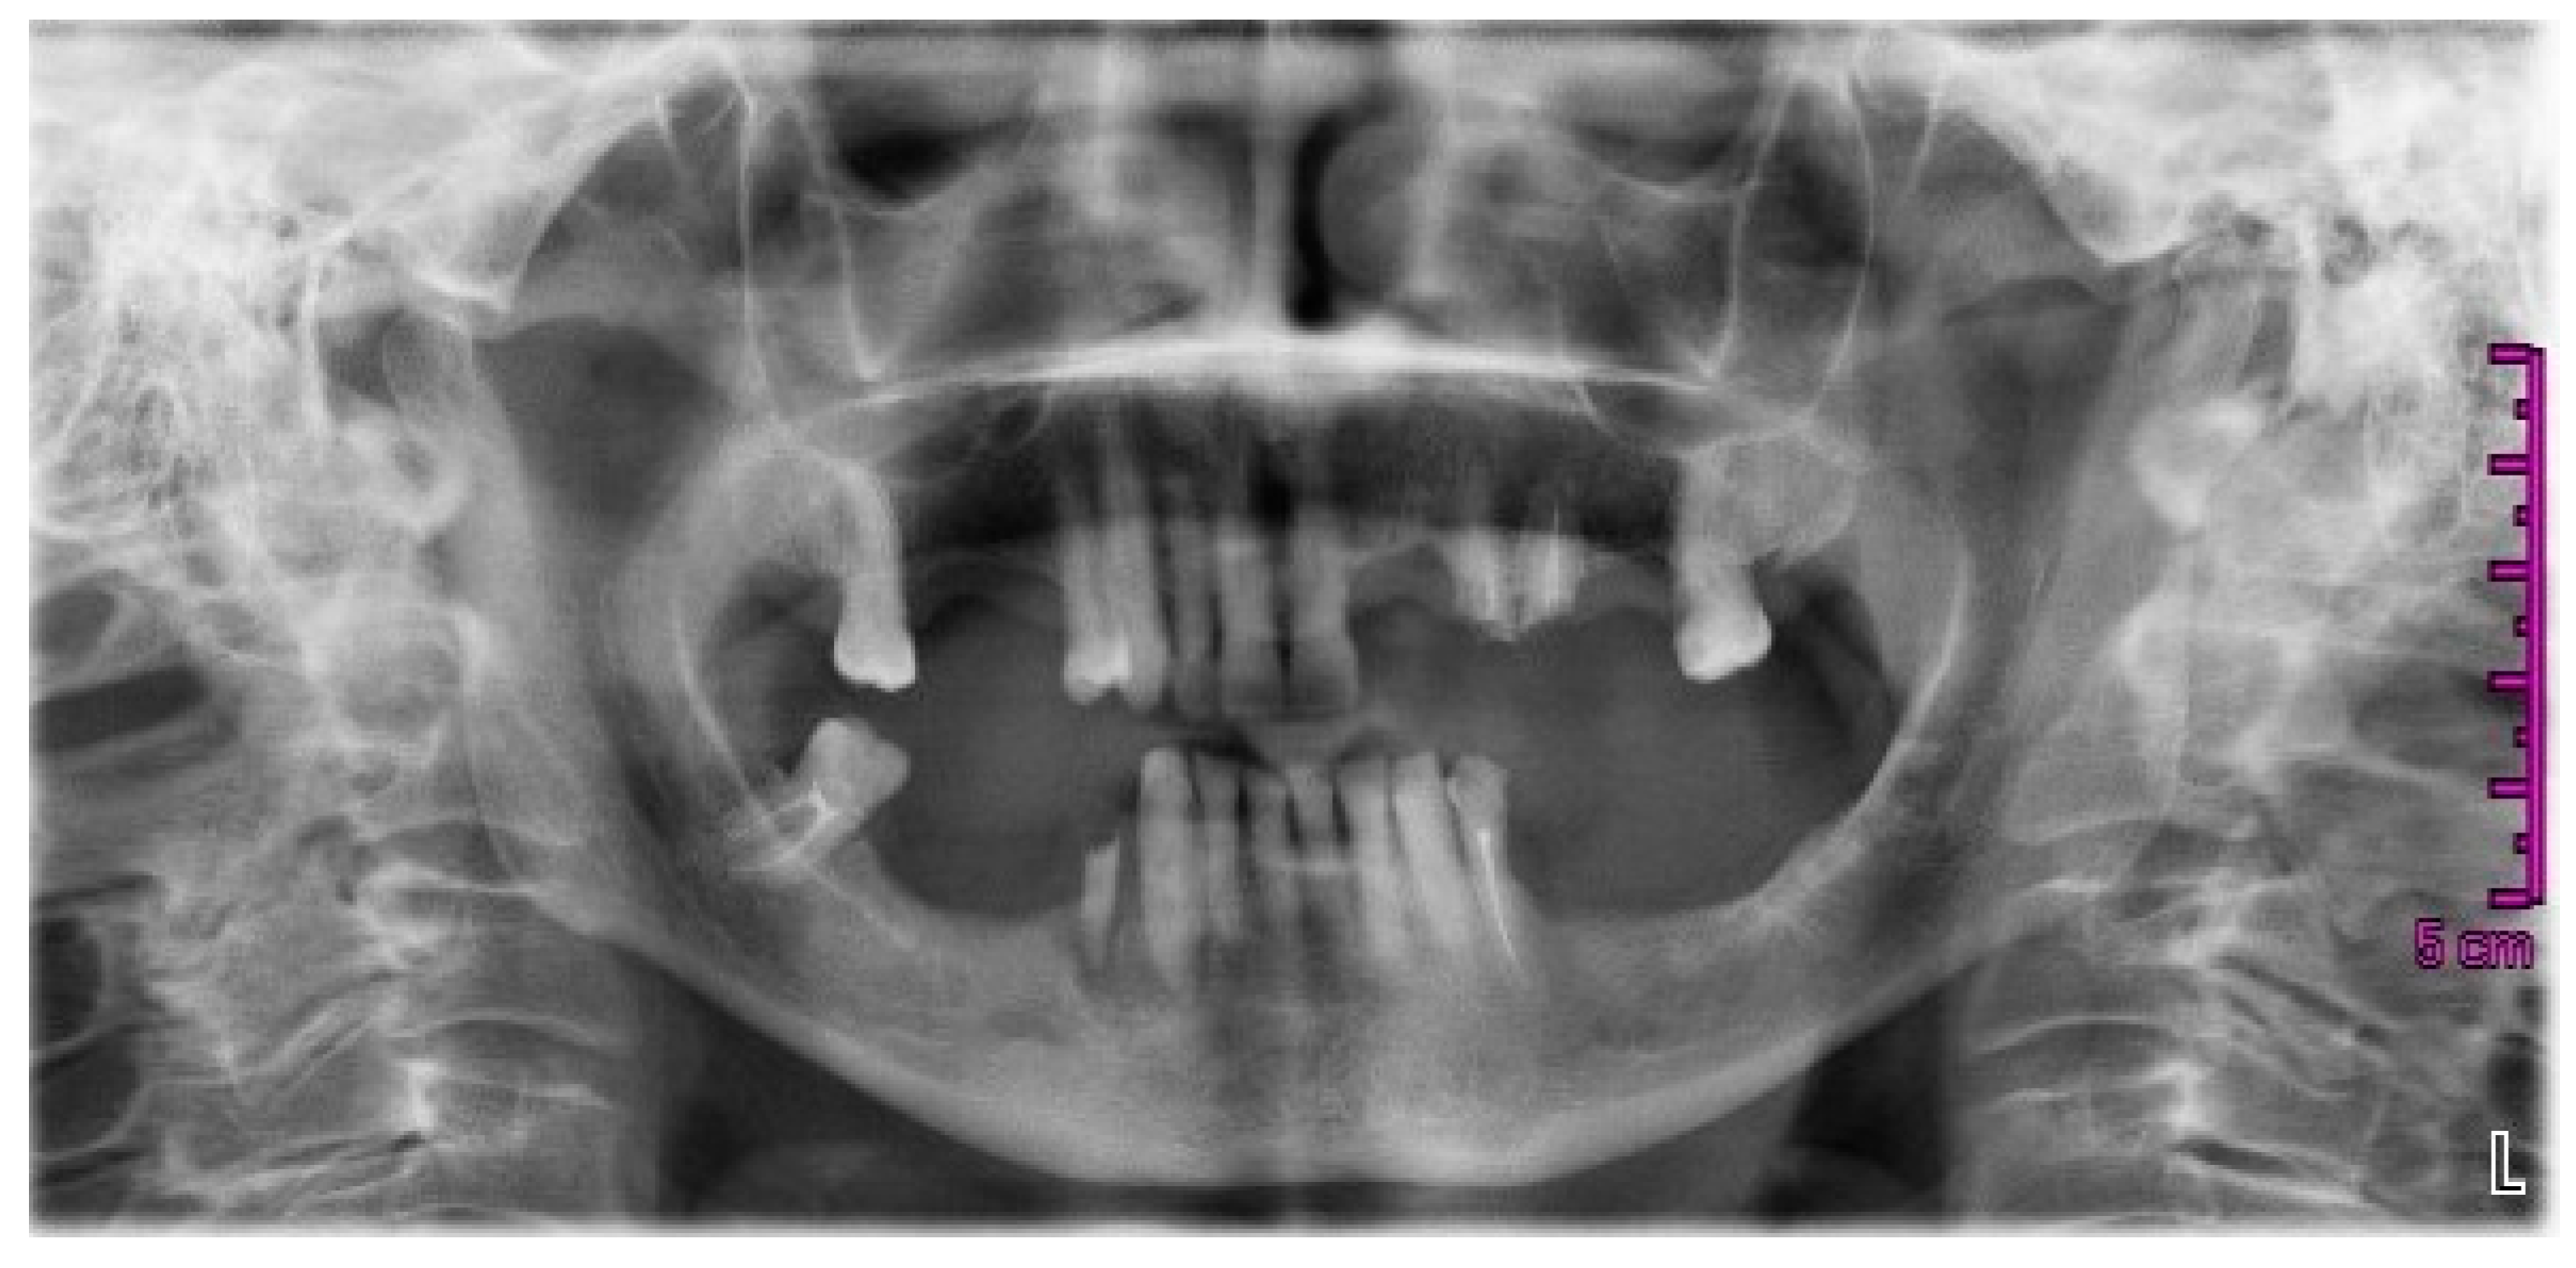 Dentistry Journal | Free Full-Text | Osteonecrosis of the Jaw (ONJ) in Osteoporosis ...